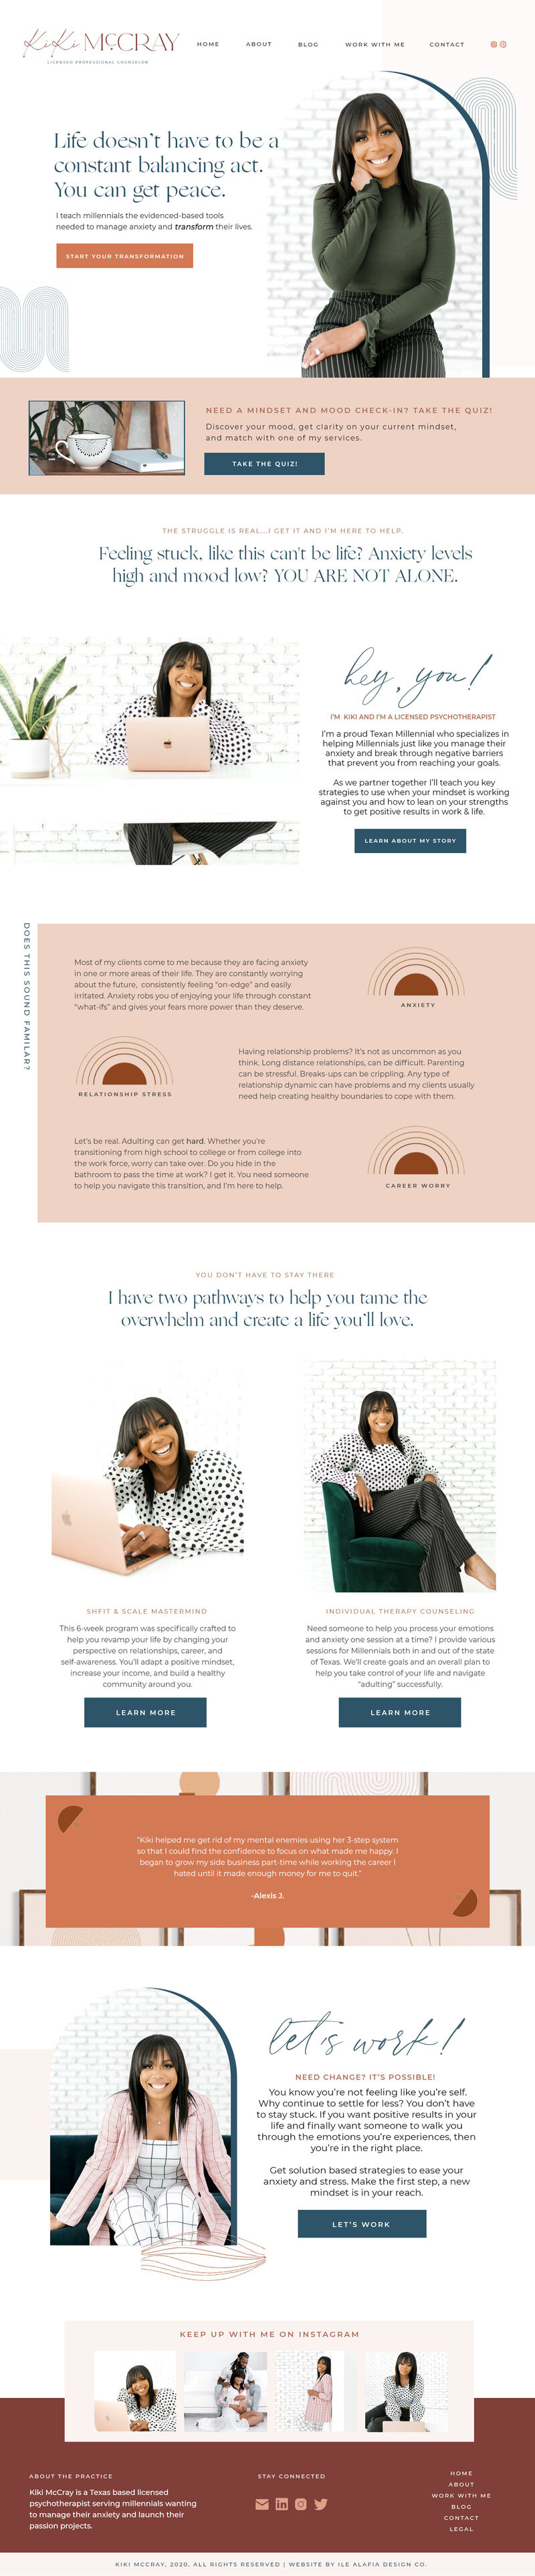 mockup of a showit website design for a therapist